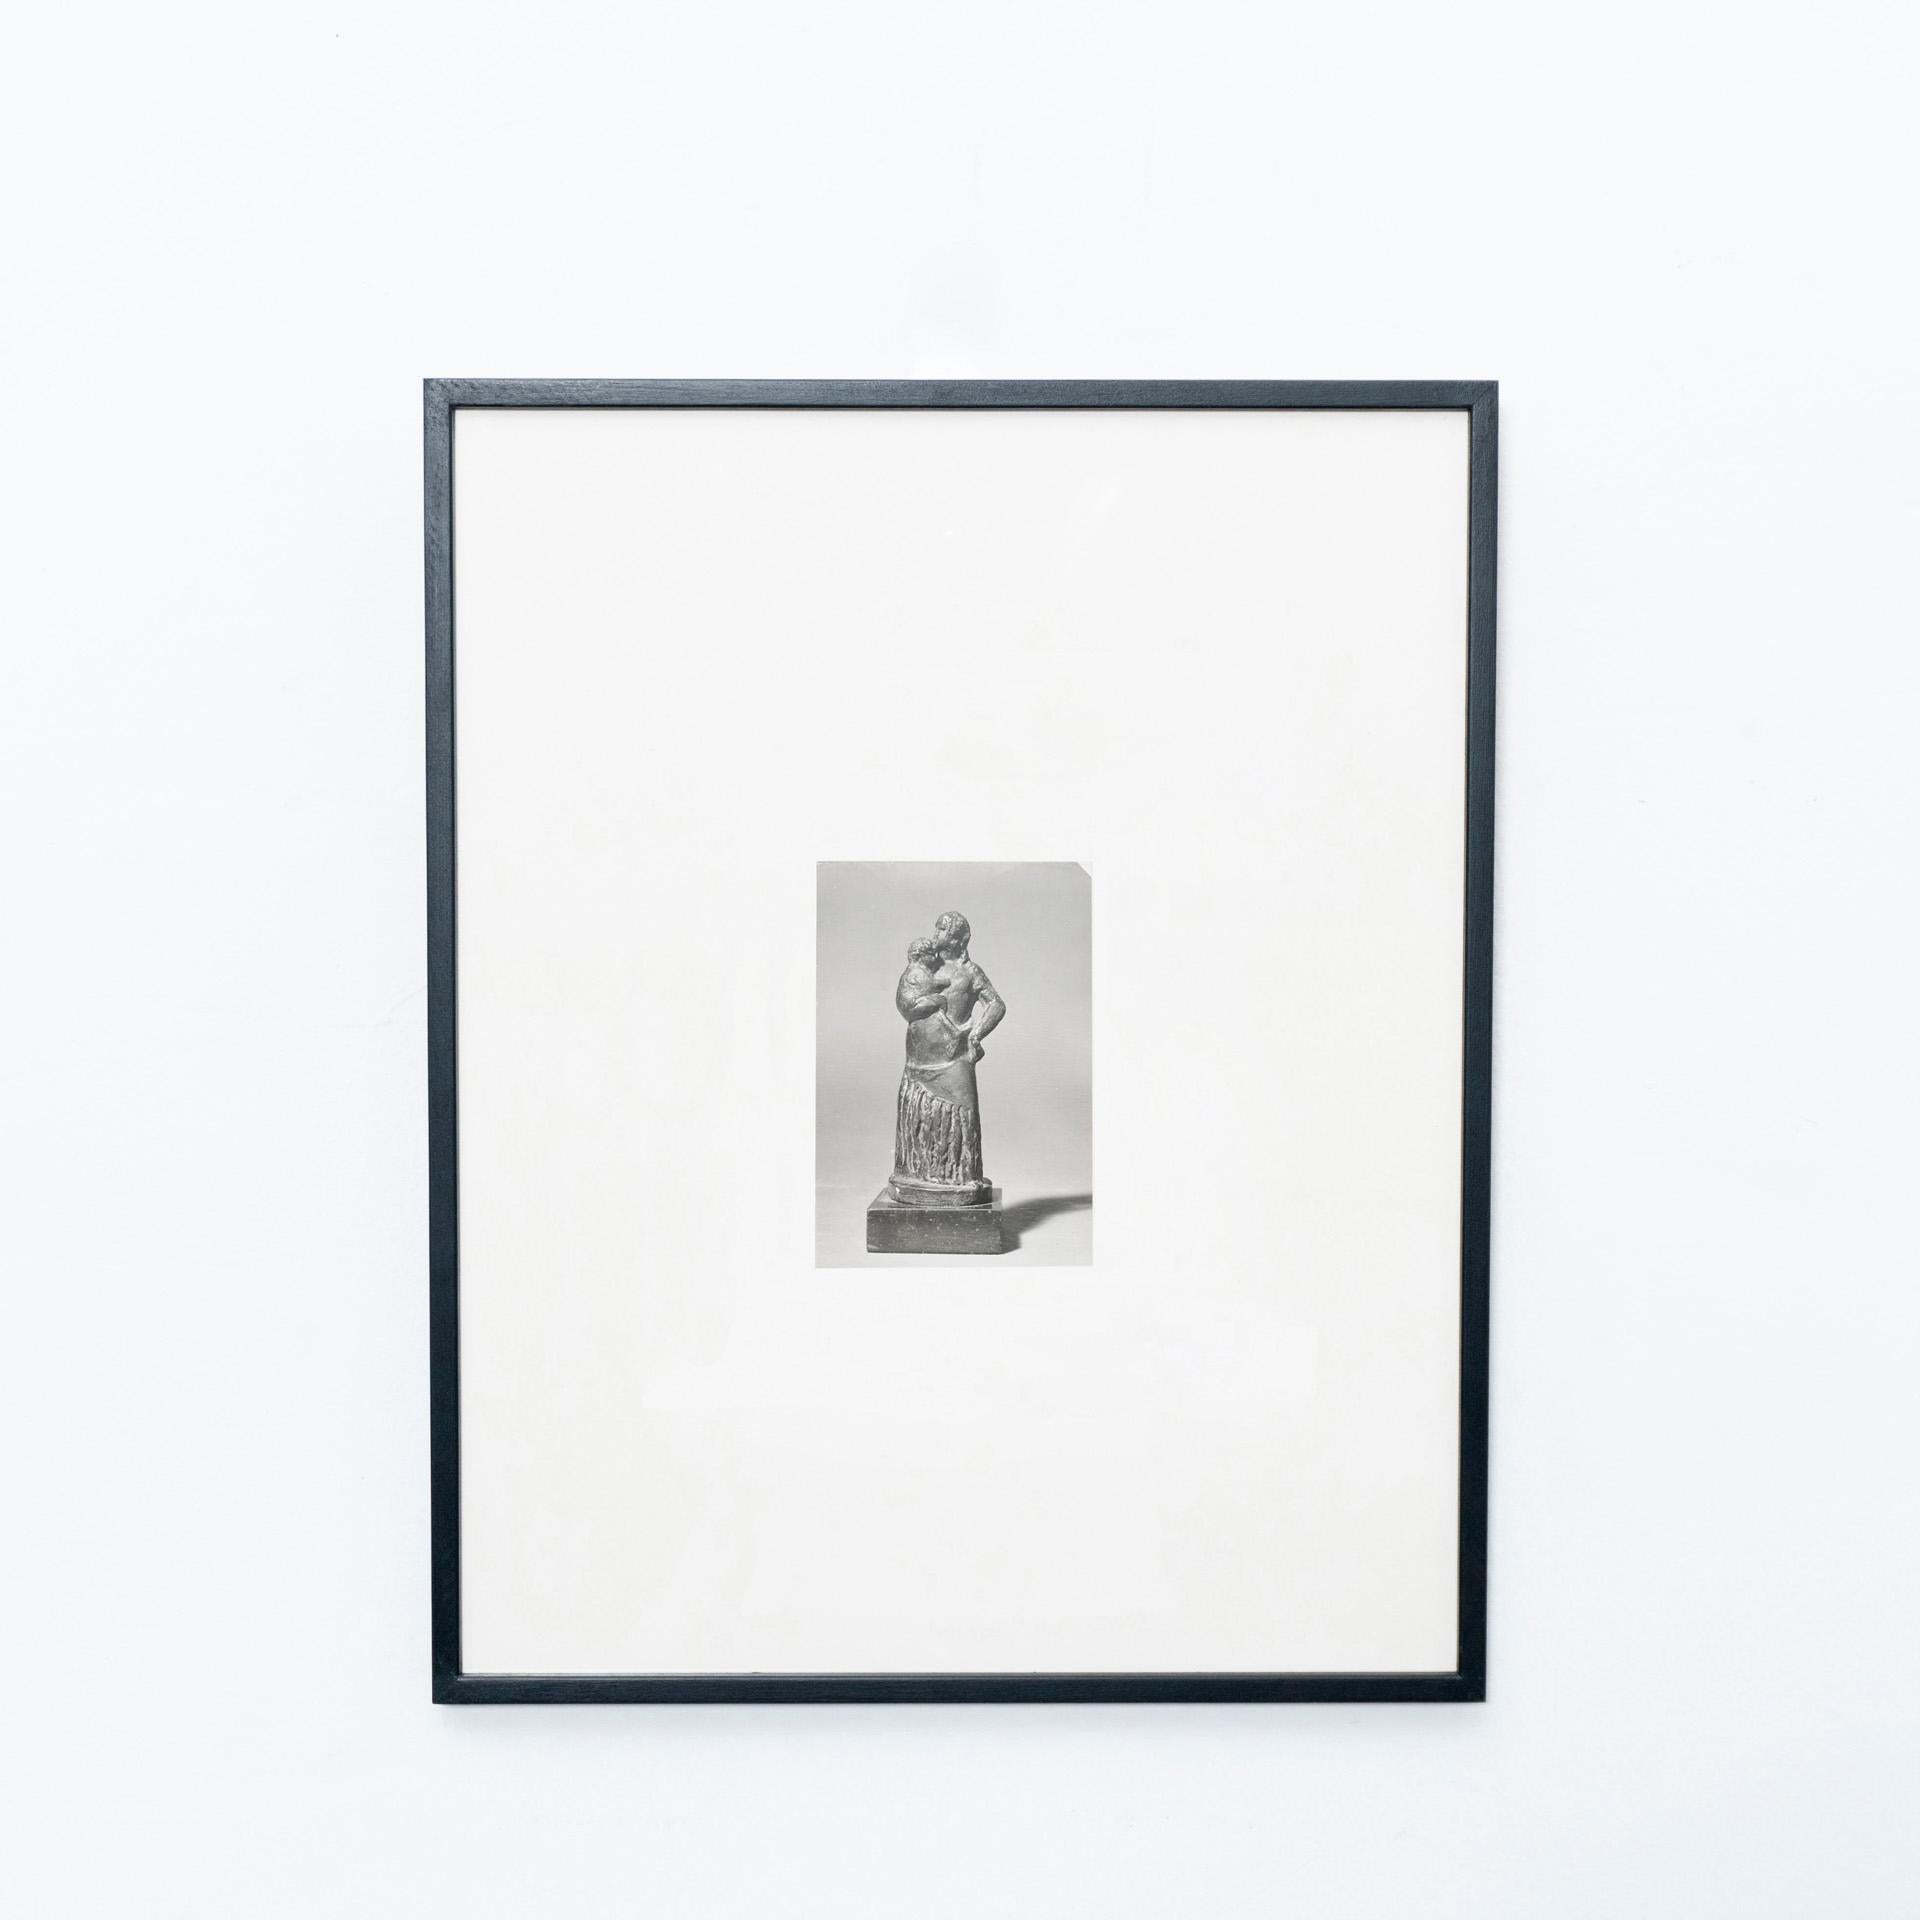 Manolo Hugué Mid Century Modern archive photography of sculpture.
Printed, circa 1960.

In original condition, with minor wear consistent with age and use, preserving a beautiful patina.

The photography comes framed. The frame on the photos is just